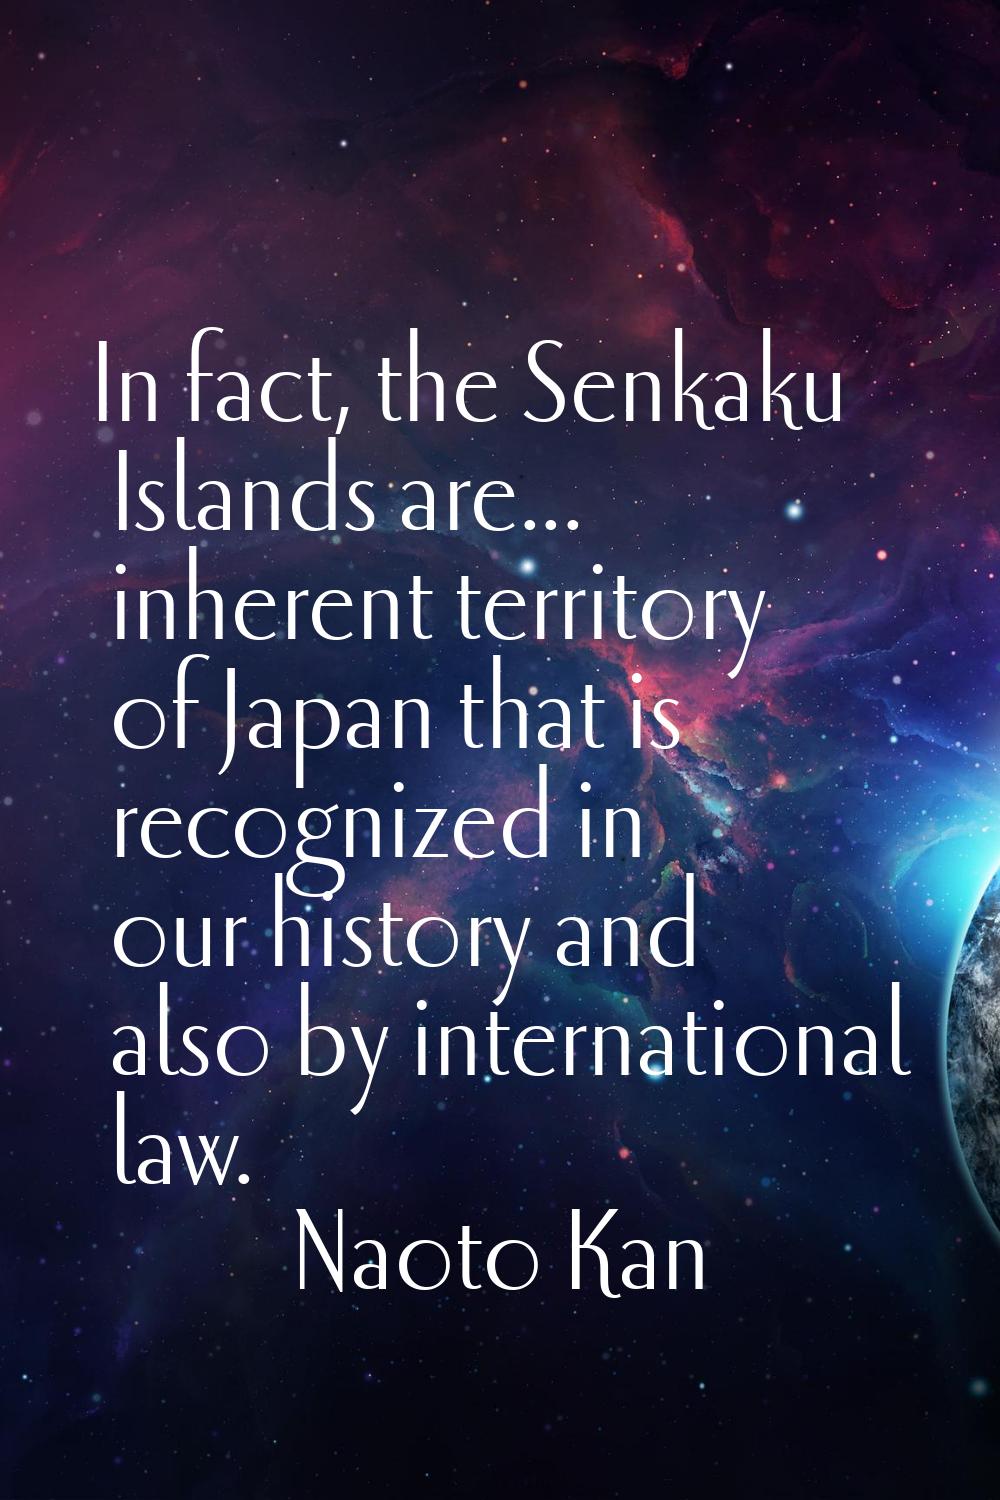 In fact, the Senkaku Islands are... inherent territory of Japan that is recognized in our history a